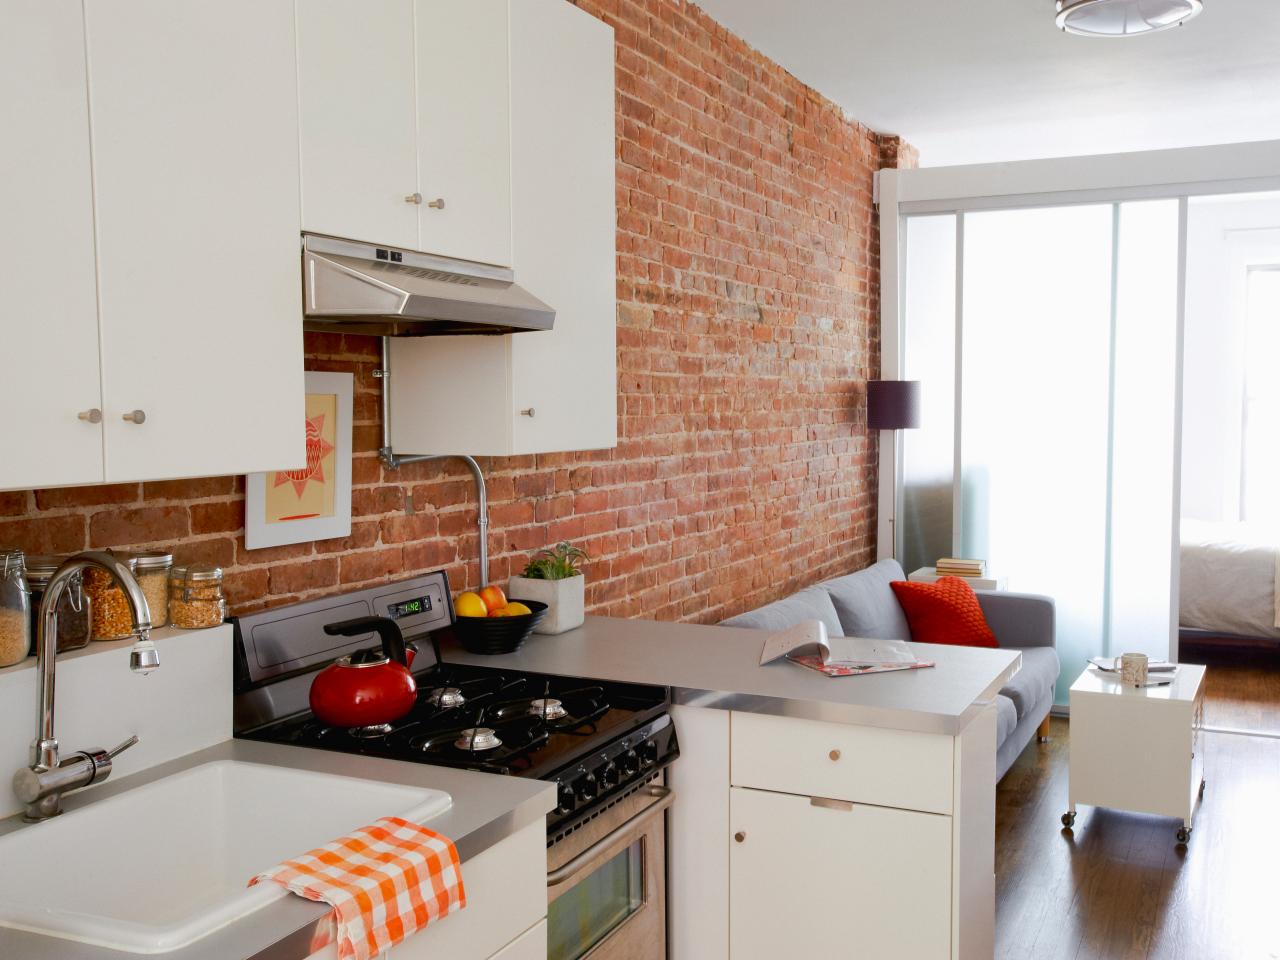 A Ground-Floor Apartment Renovation in Sunnyside, Queens   Kitchen  concepts, Open concept kitchen and living room, Living room kitchen